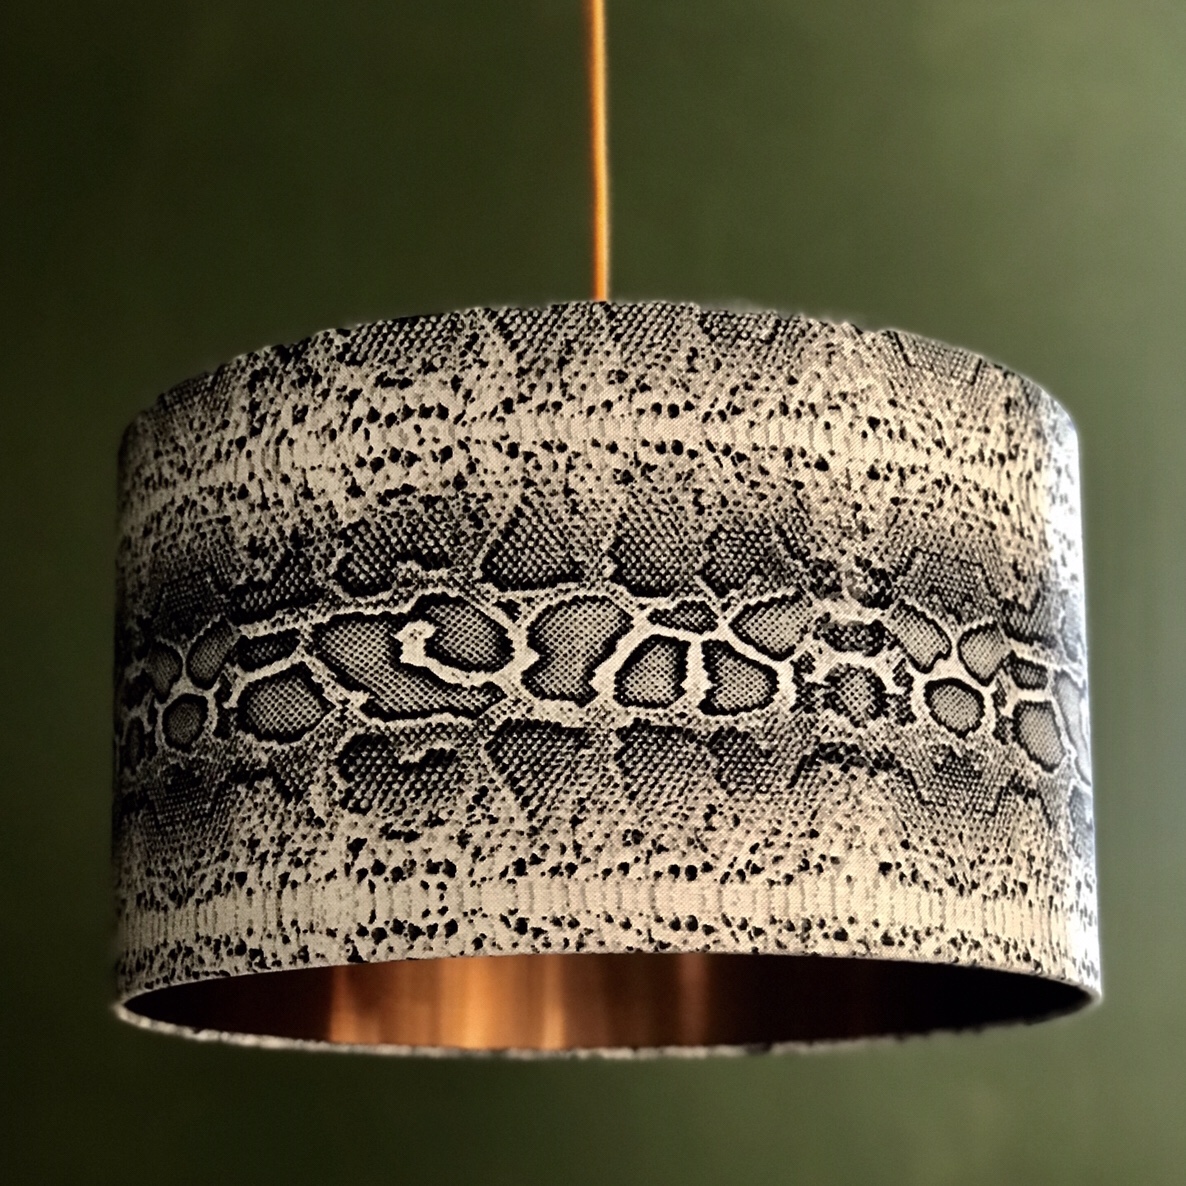 Serpent Snakeskin Linen Lampshade With, How To Replace Lampshade Lining